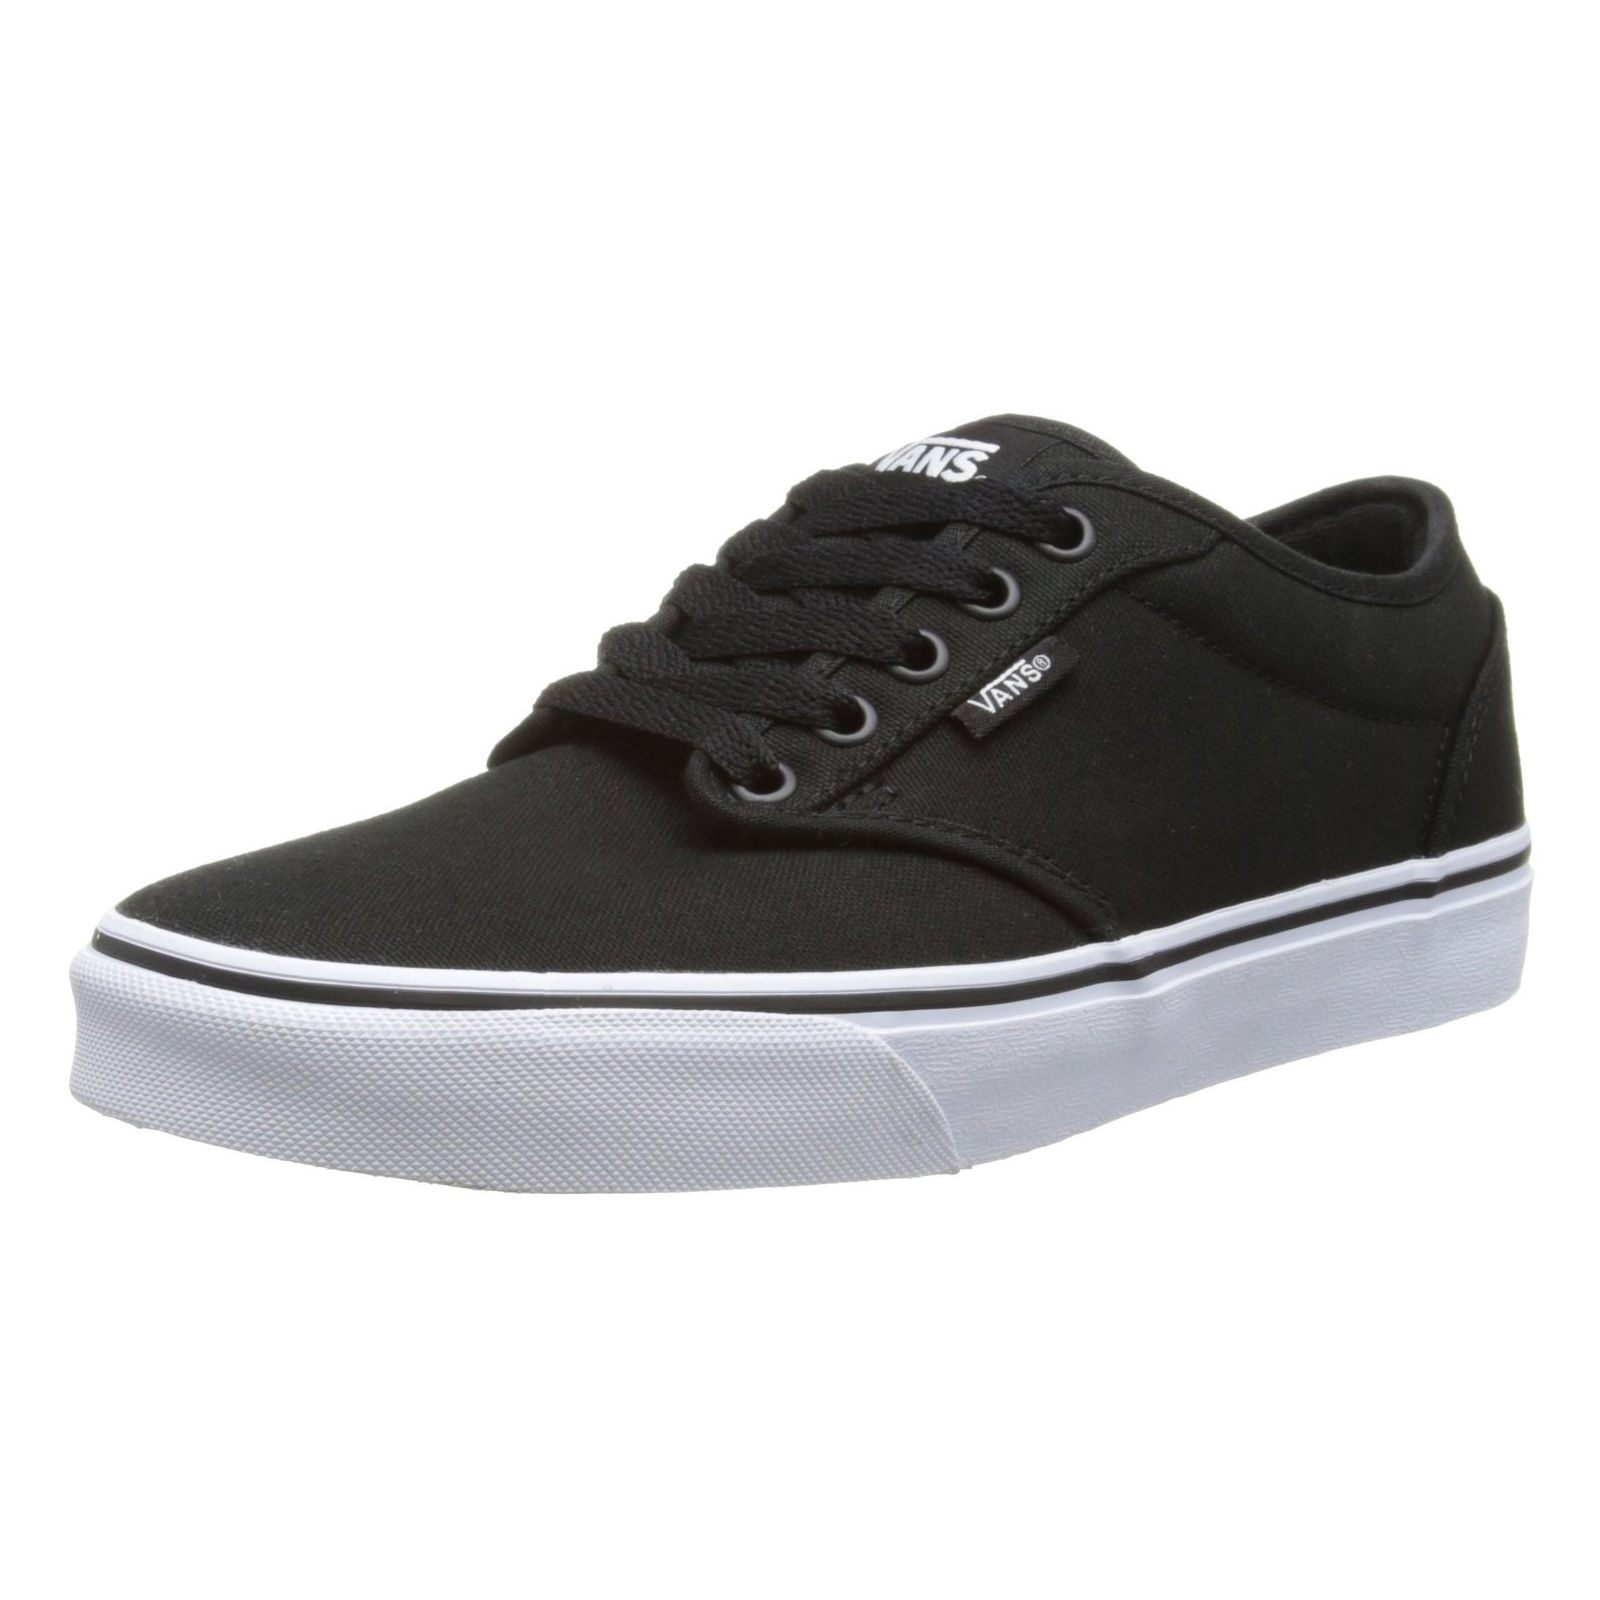 vans atwood black and white cheap online